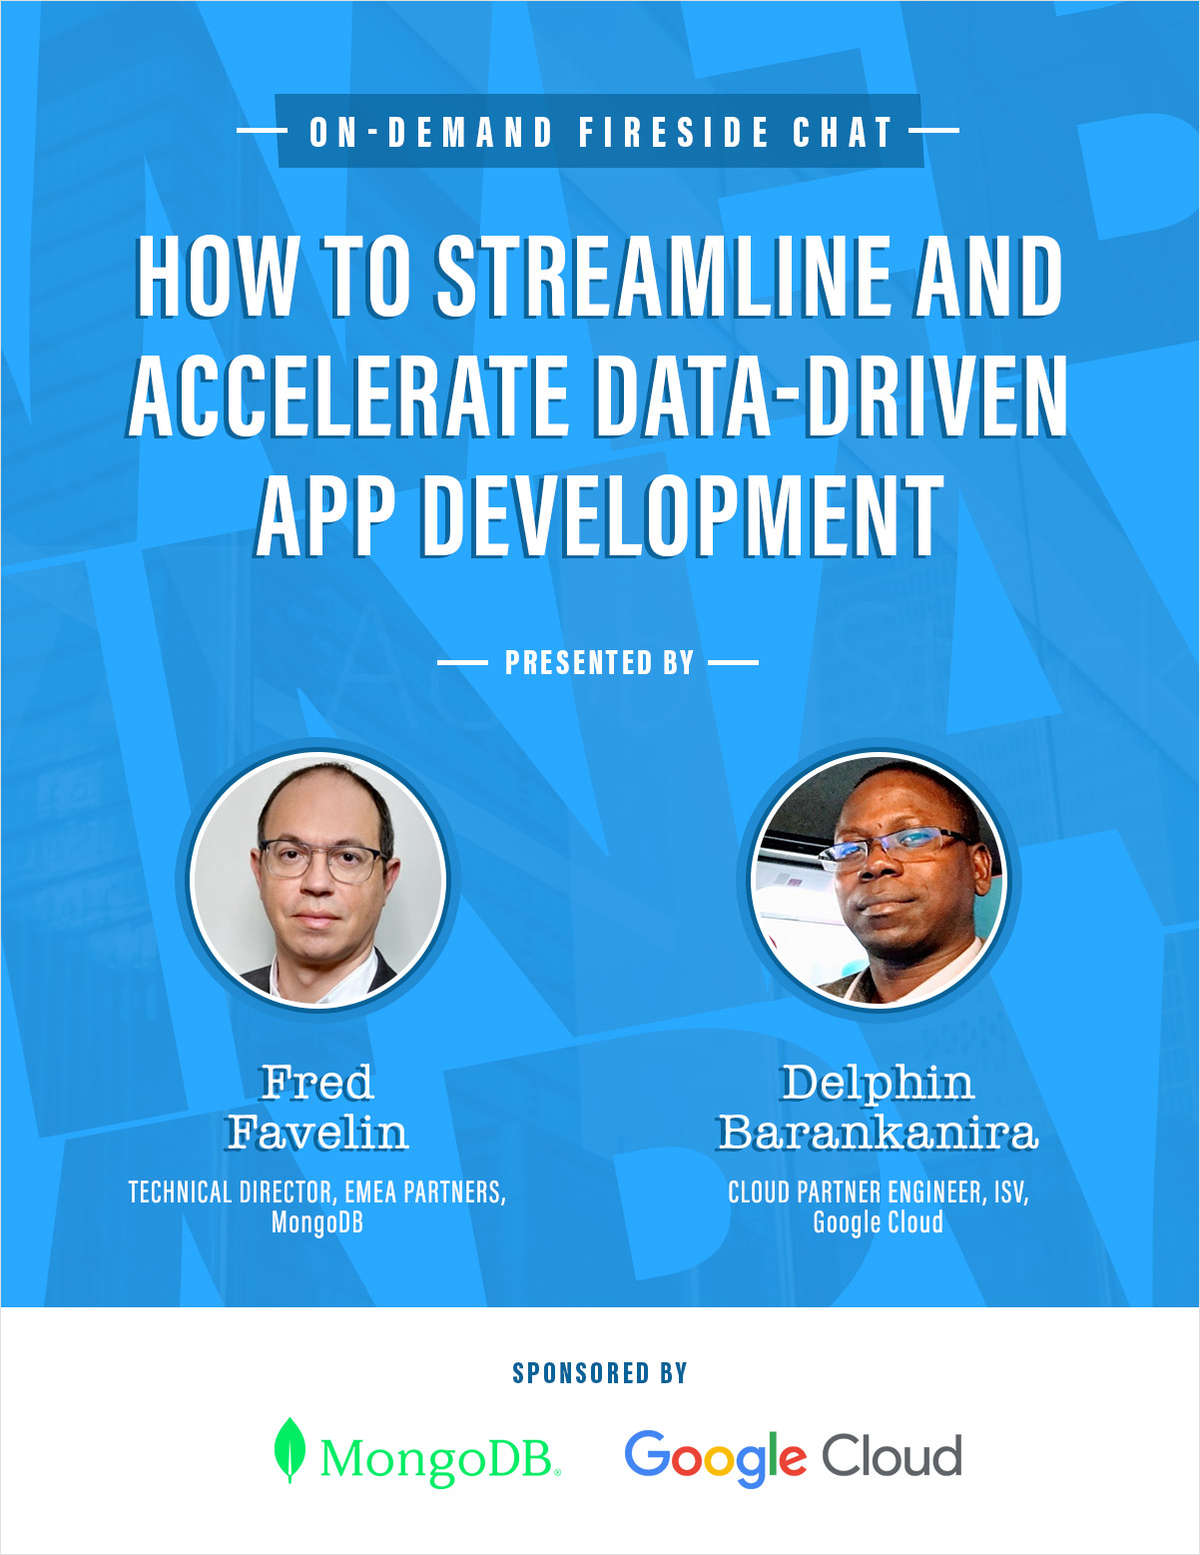 How to Streamline and Accelerate Data-Driven App Development